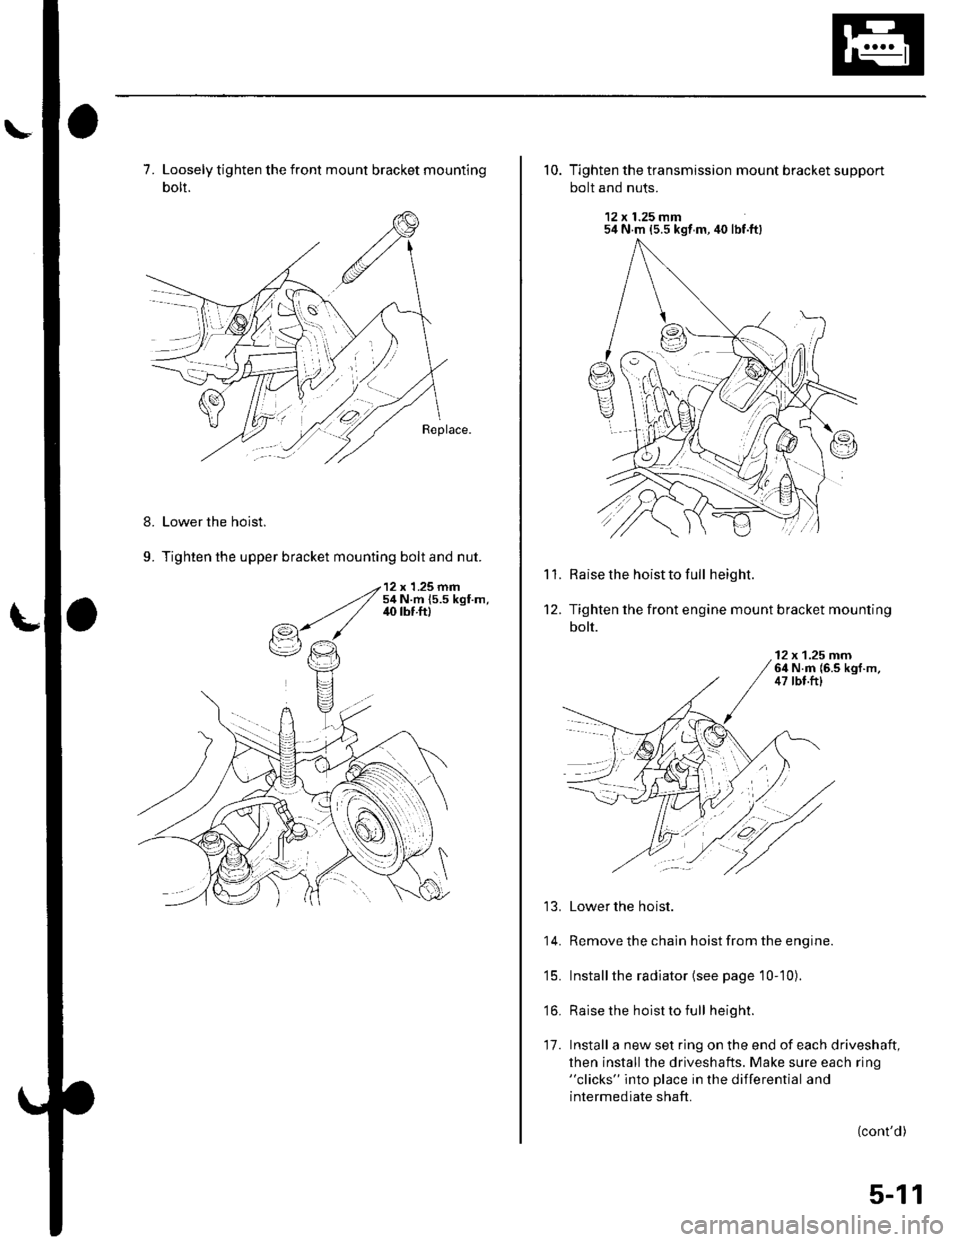 HONDA CIVIC 2002 7.G Workshop Manual 7. Loosely tighten the front mount bracket mounting
bolt.
Lower the hoist.
Tighten the upper bracket mounting bolt and nut.
8.
9.
10. Tighten the transmission mount bracket support
bolt and nuts.
12 x